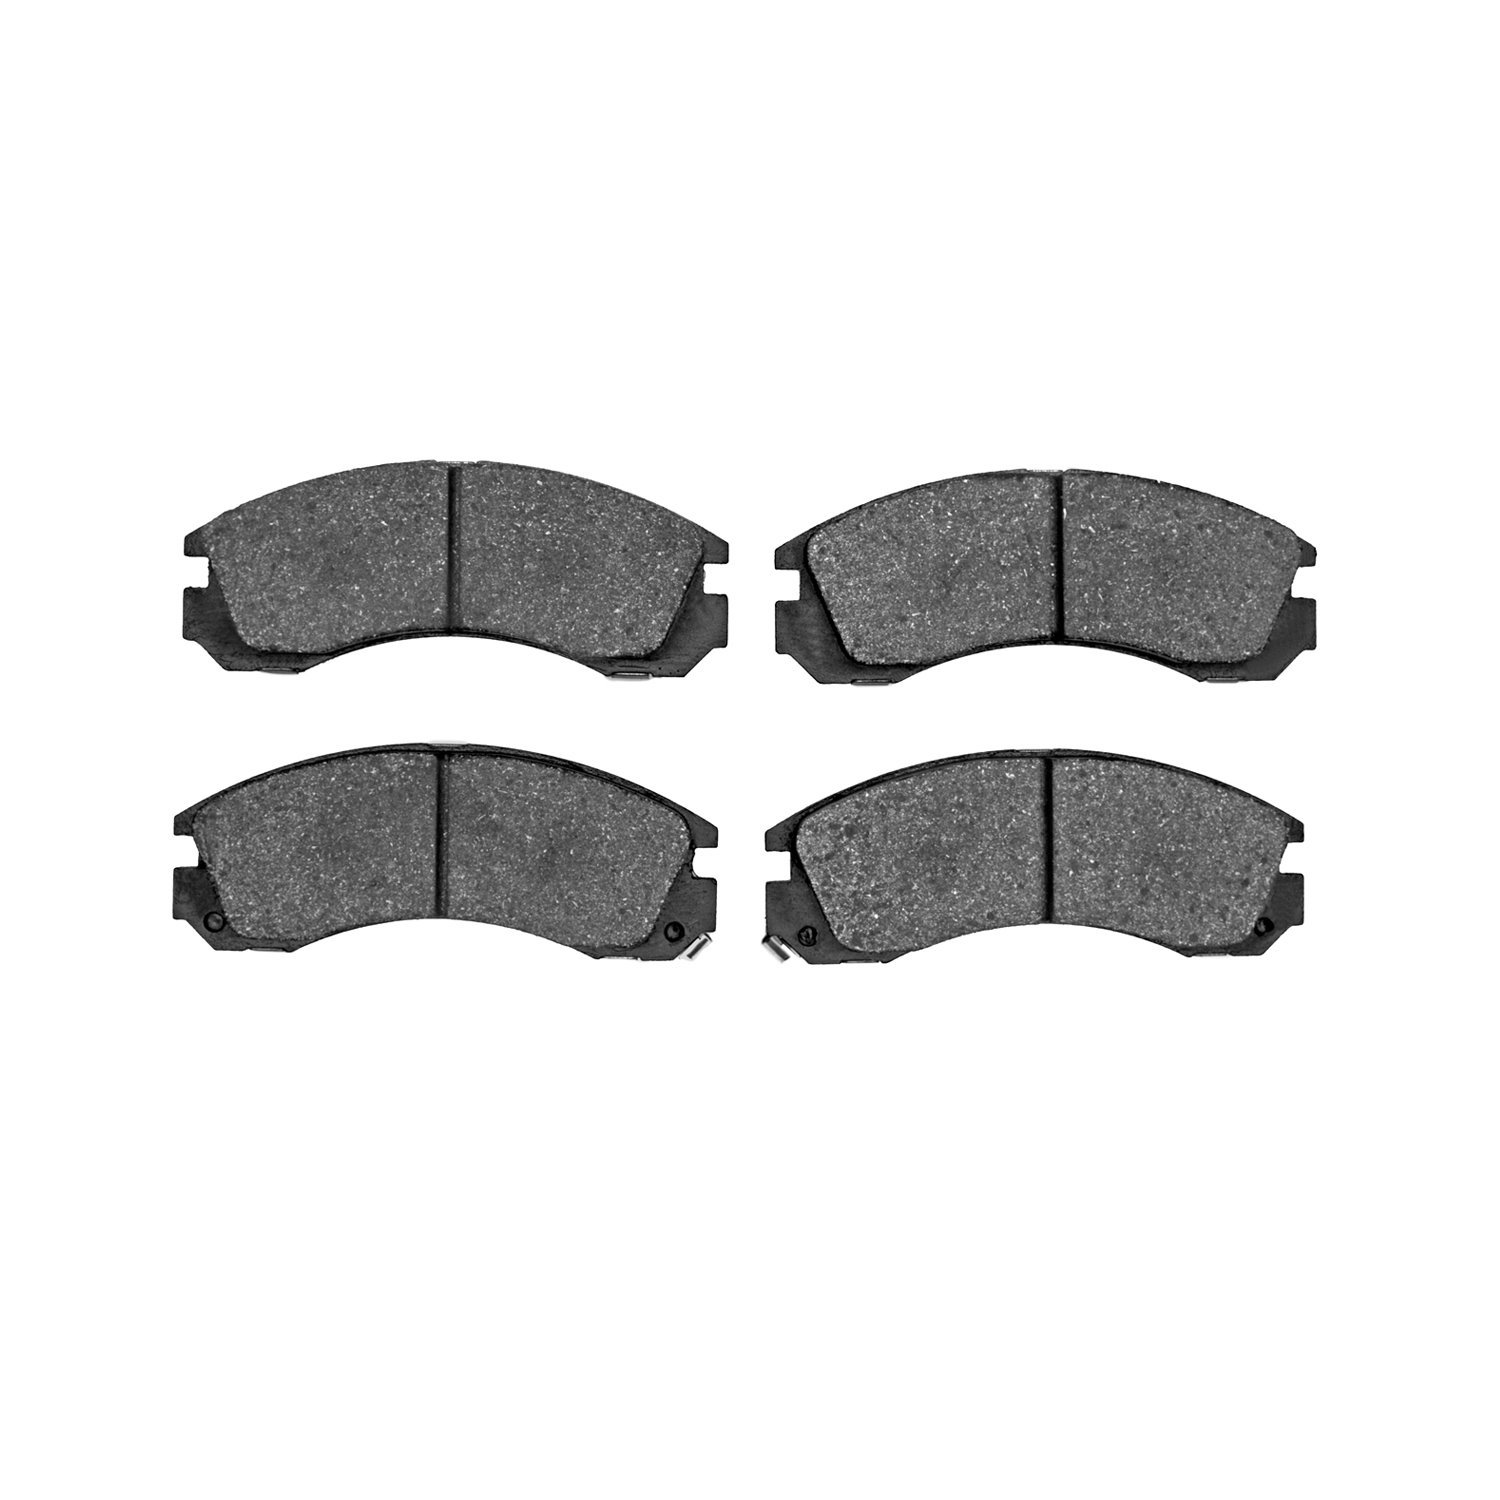 1000-0530-00 Track/Street Low-Metallic Brake Pads Kit, Fits Select Multiple Makes/Models, Position: Front